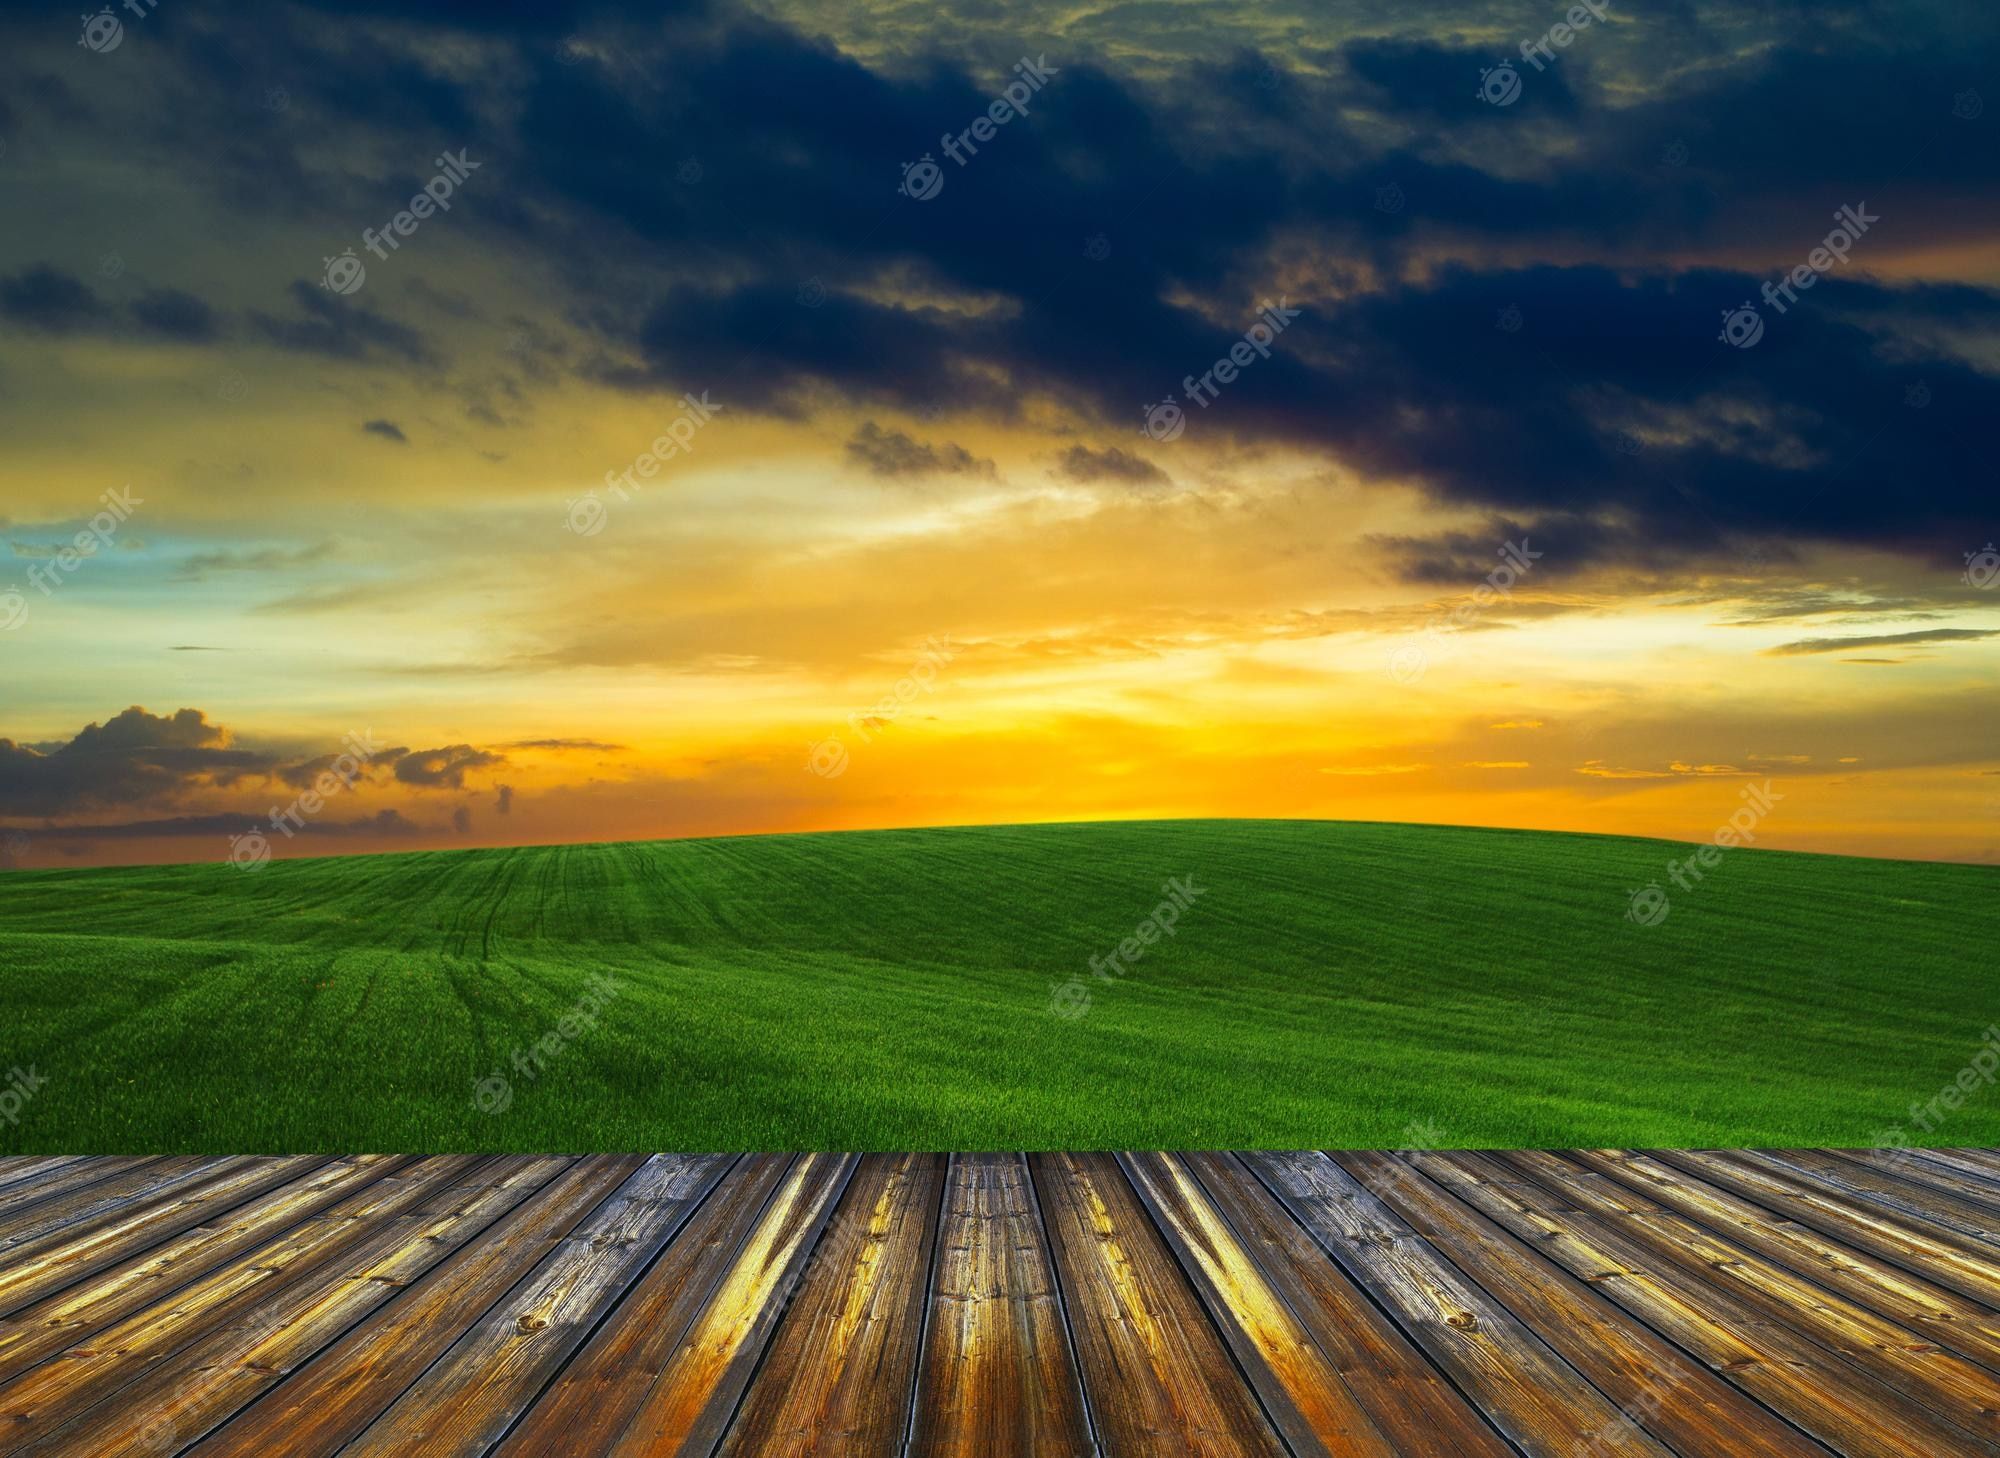 A sunset over the grassy field with wooden deck - Farm